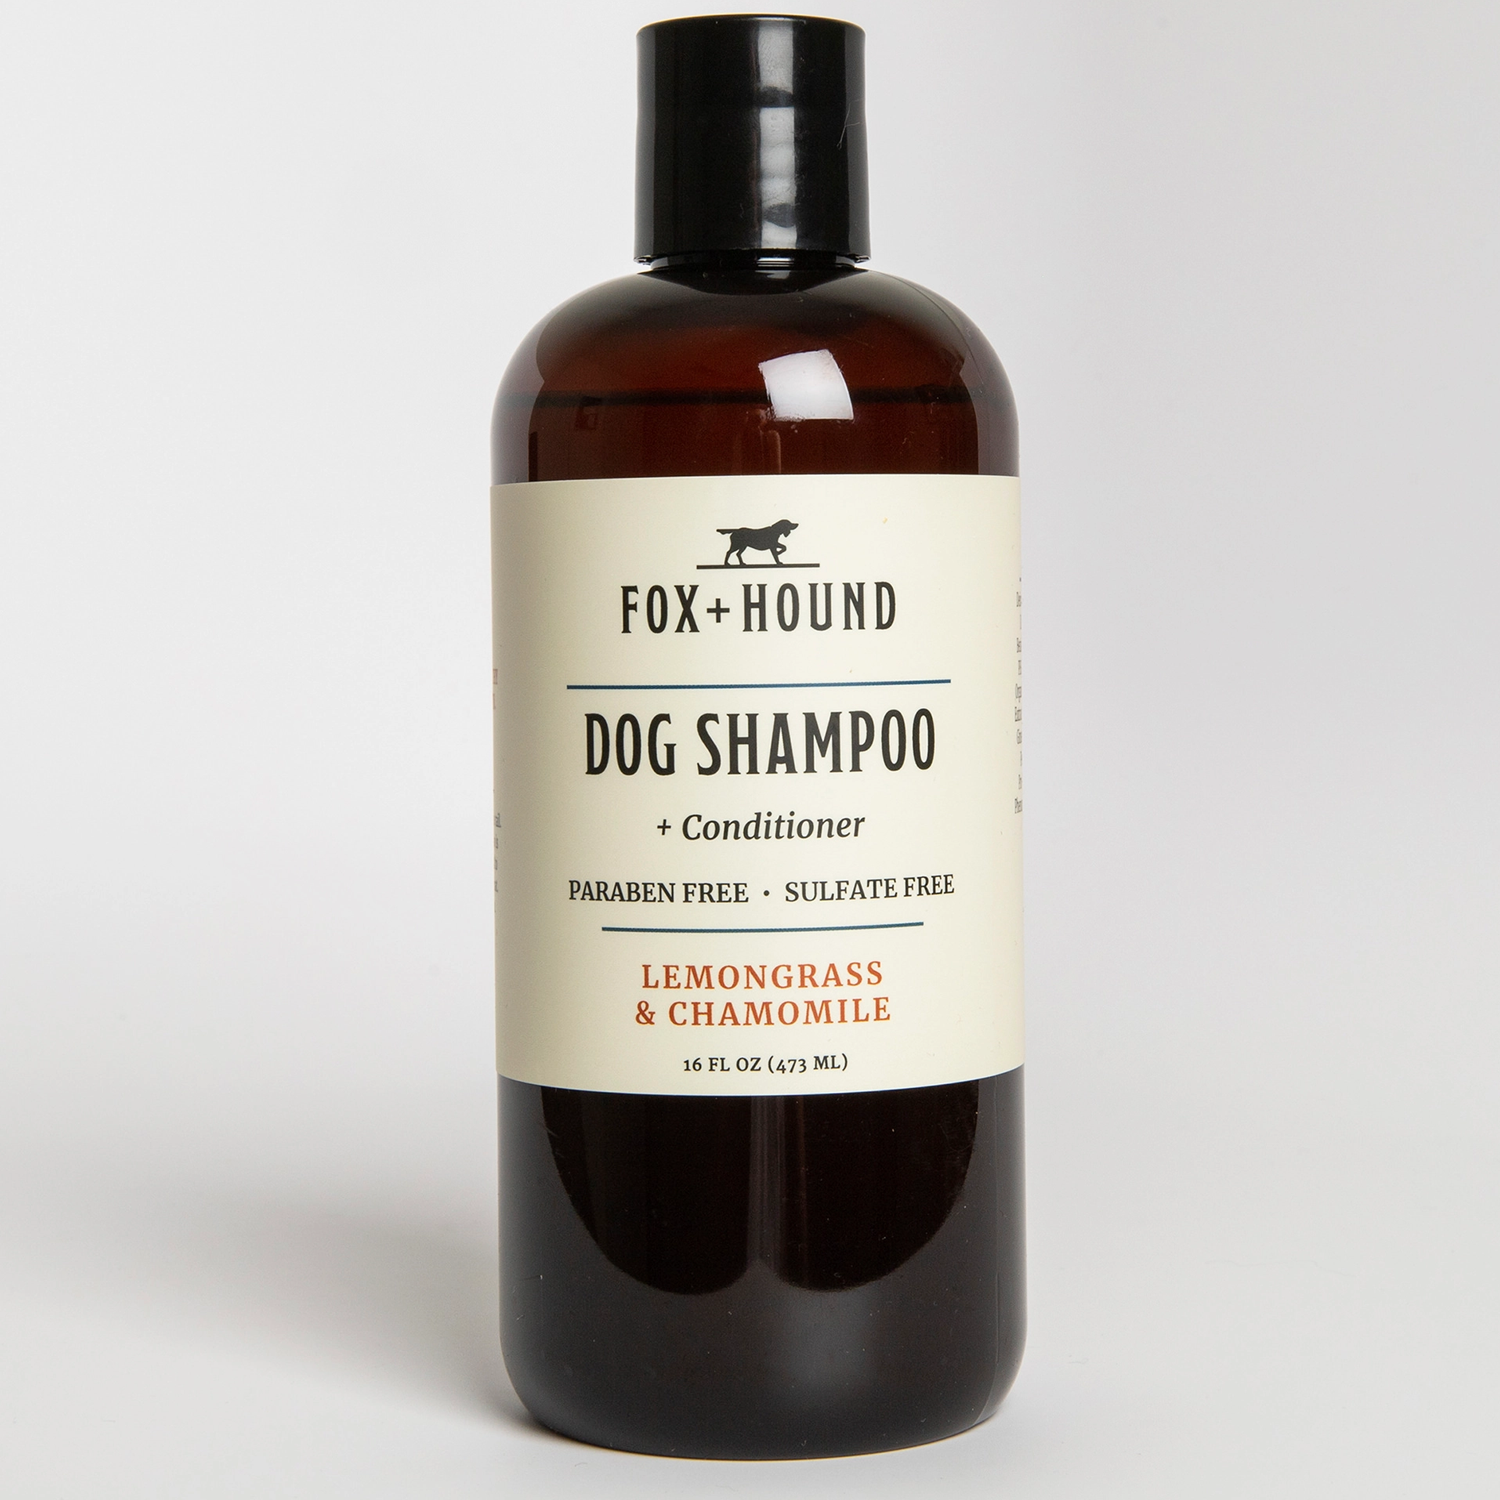 Pet Boutique - Dog Grooming - Bath and Body - Dog Shampoo + Conditioner: Lemongrass & Chamomile by Fox + Hound